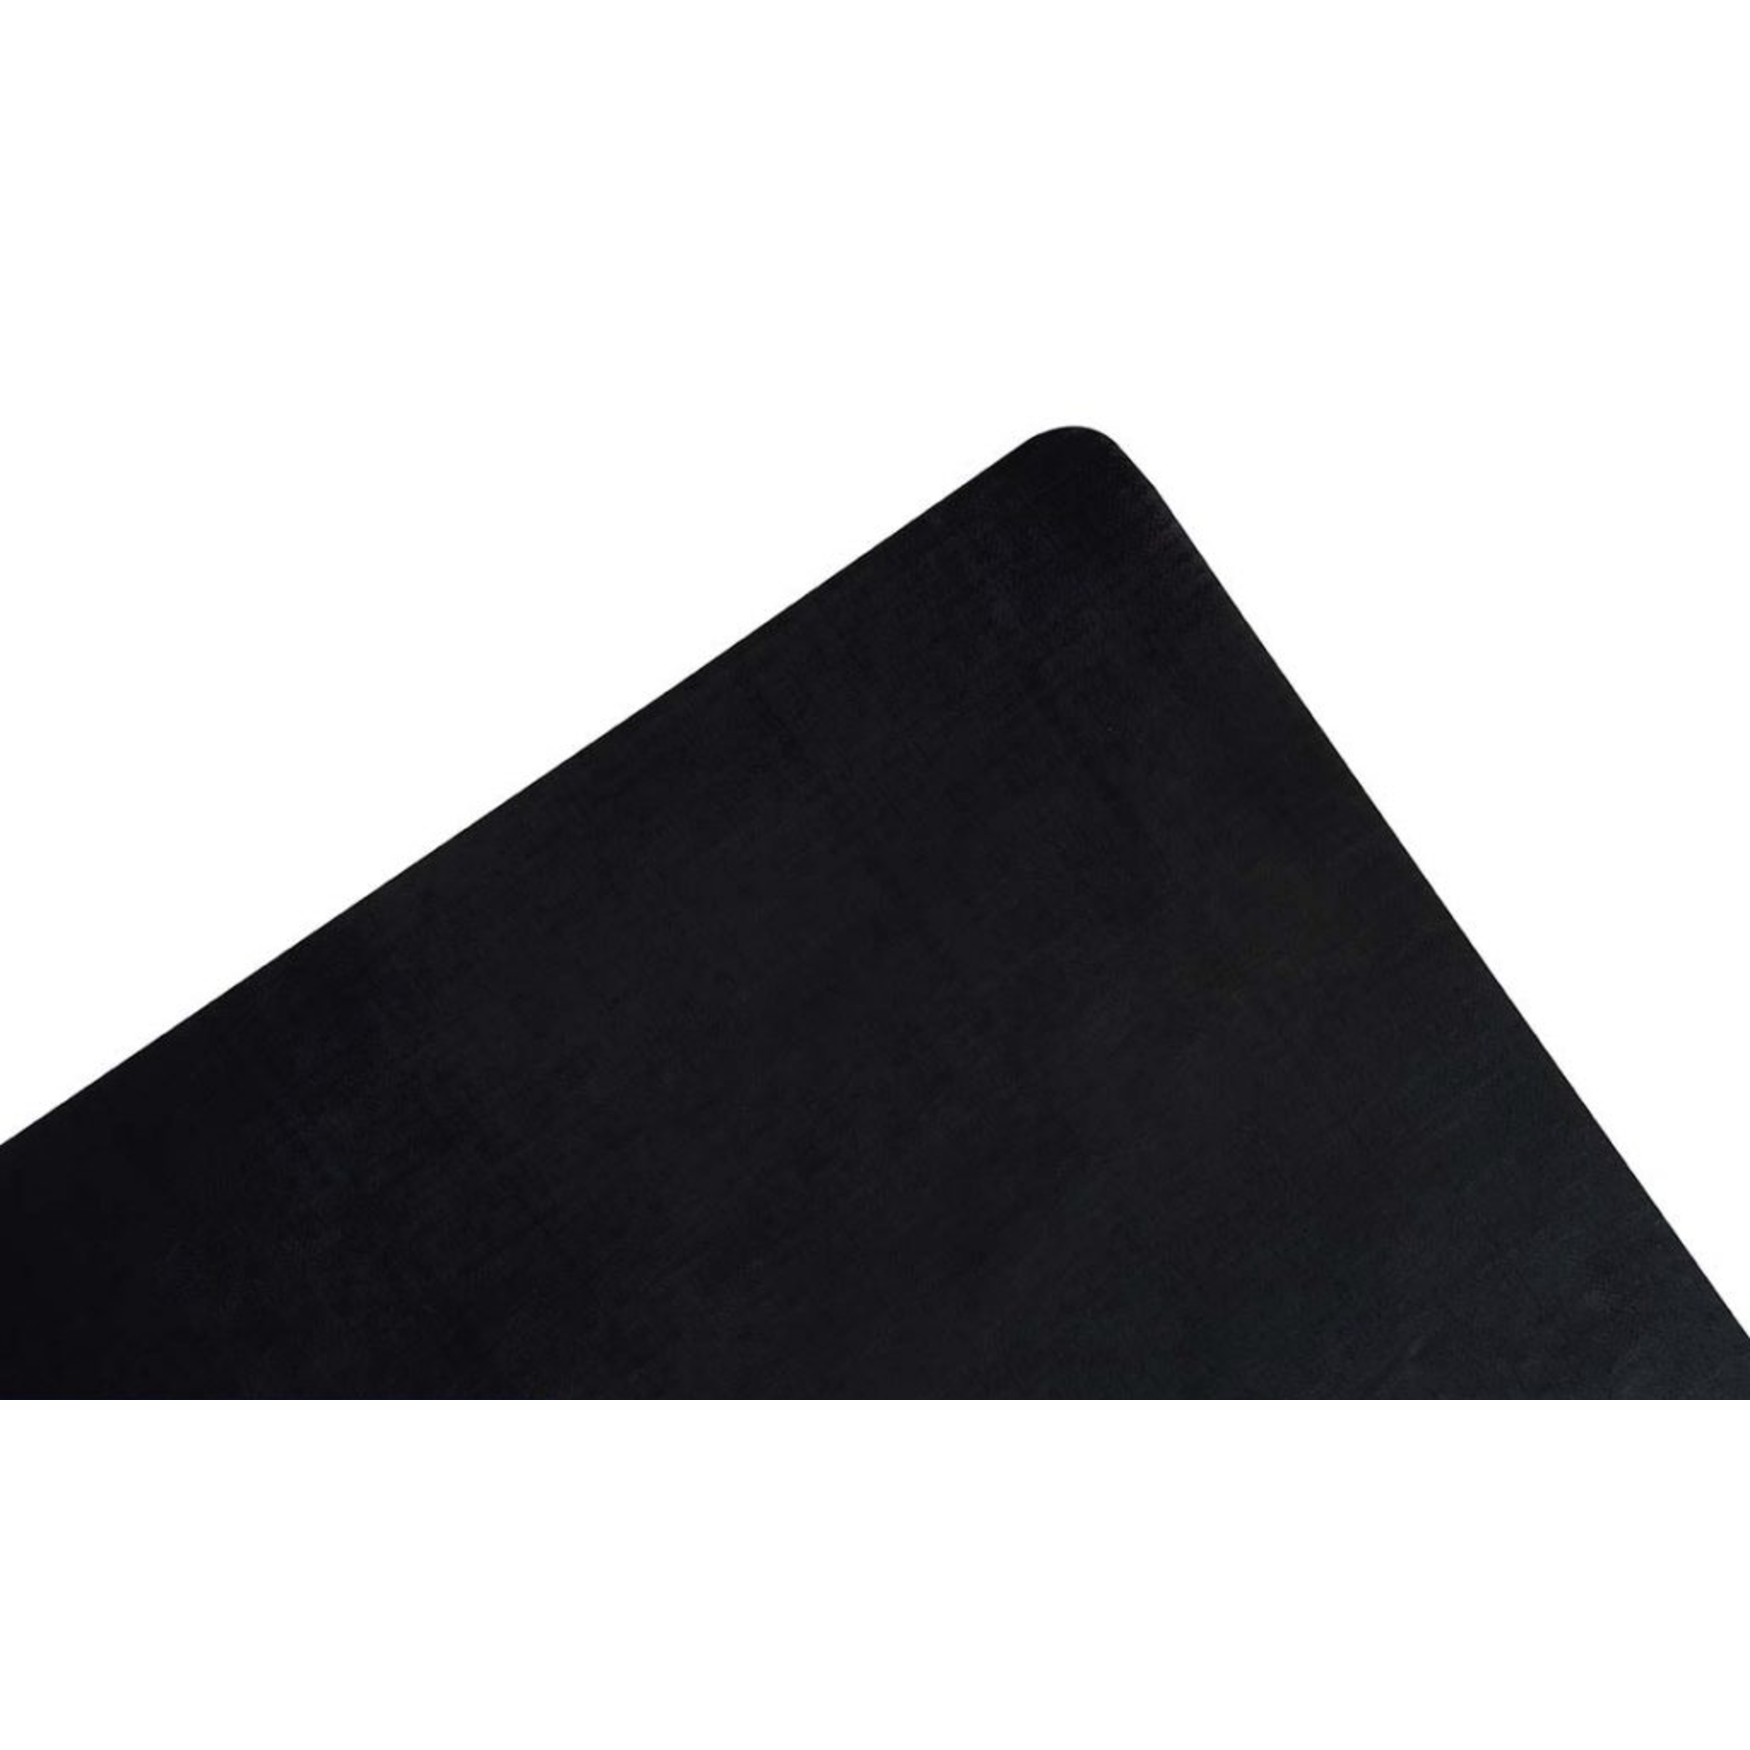 Antistatic protective film for transfers made of PTFE, 50cm x 60cm